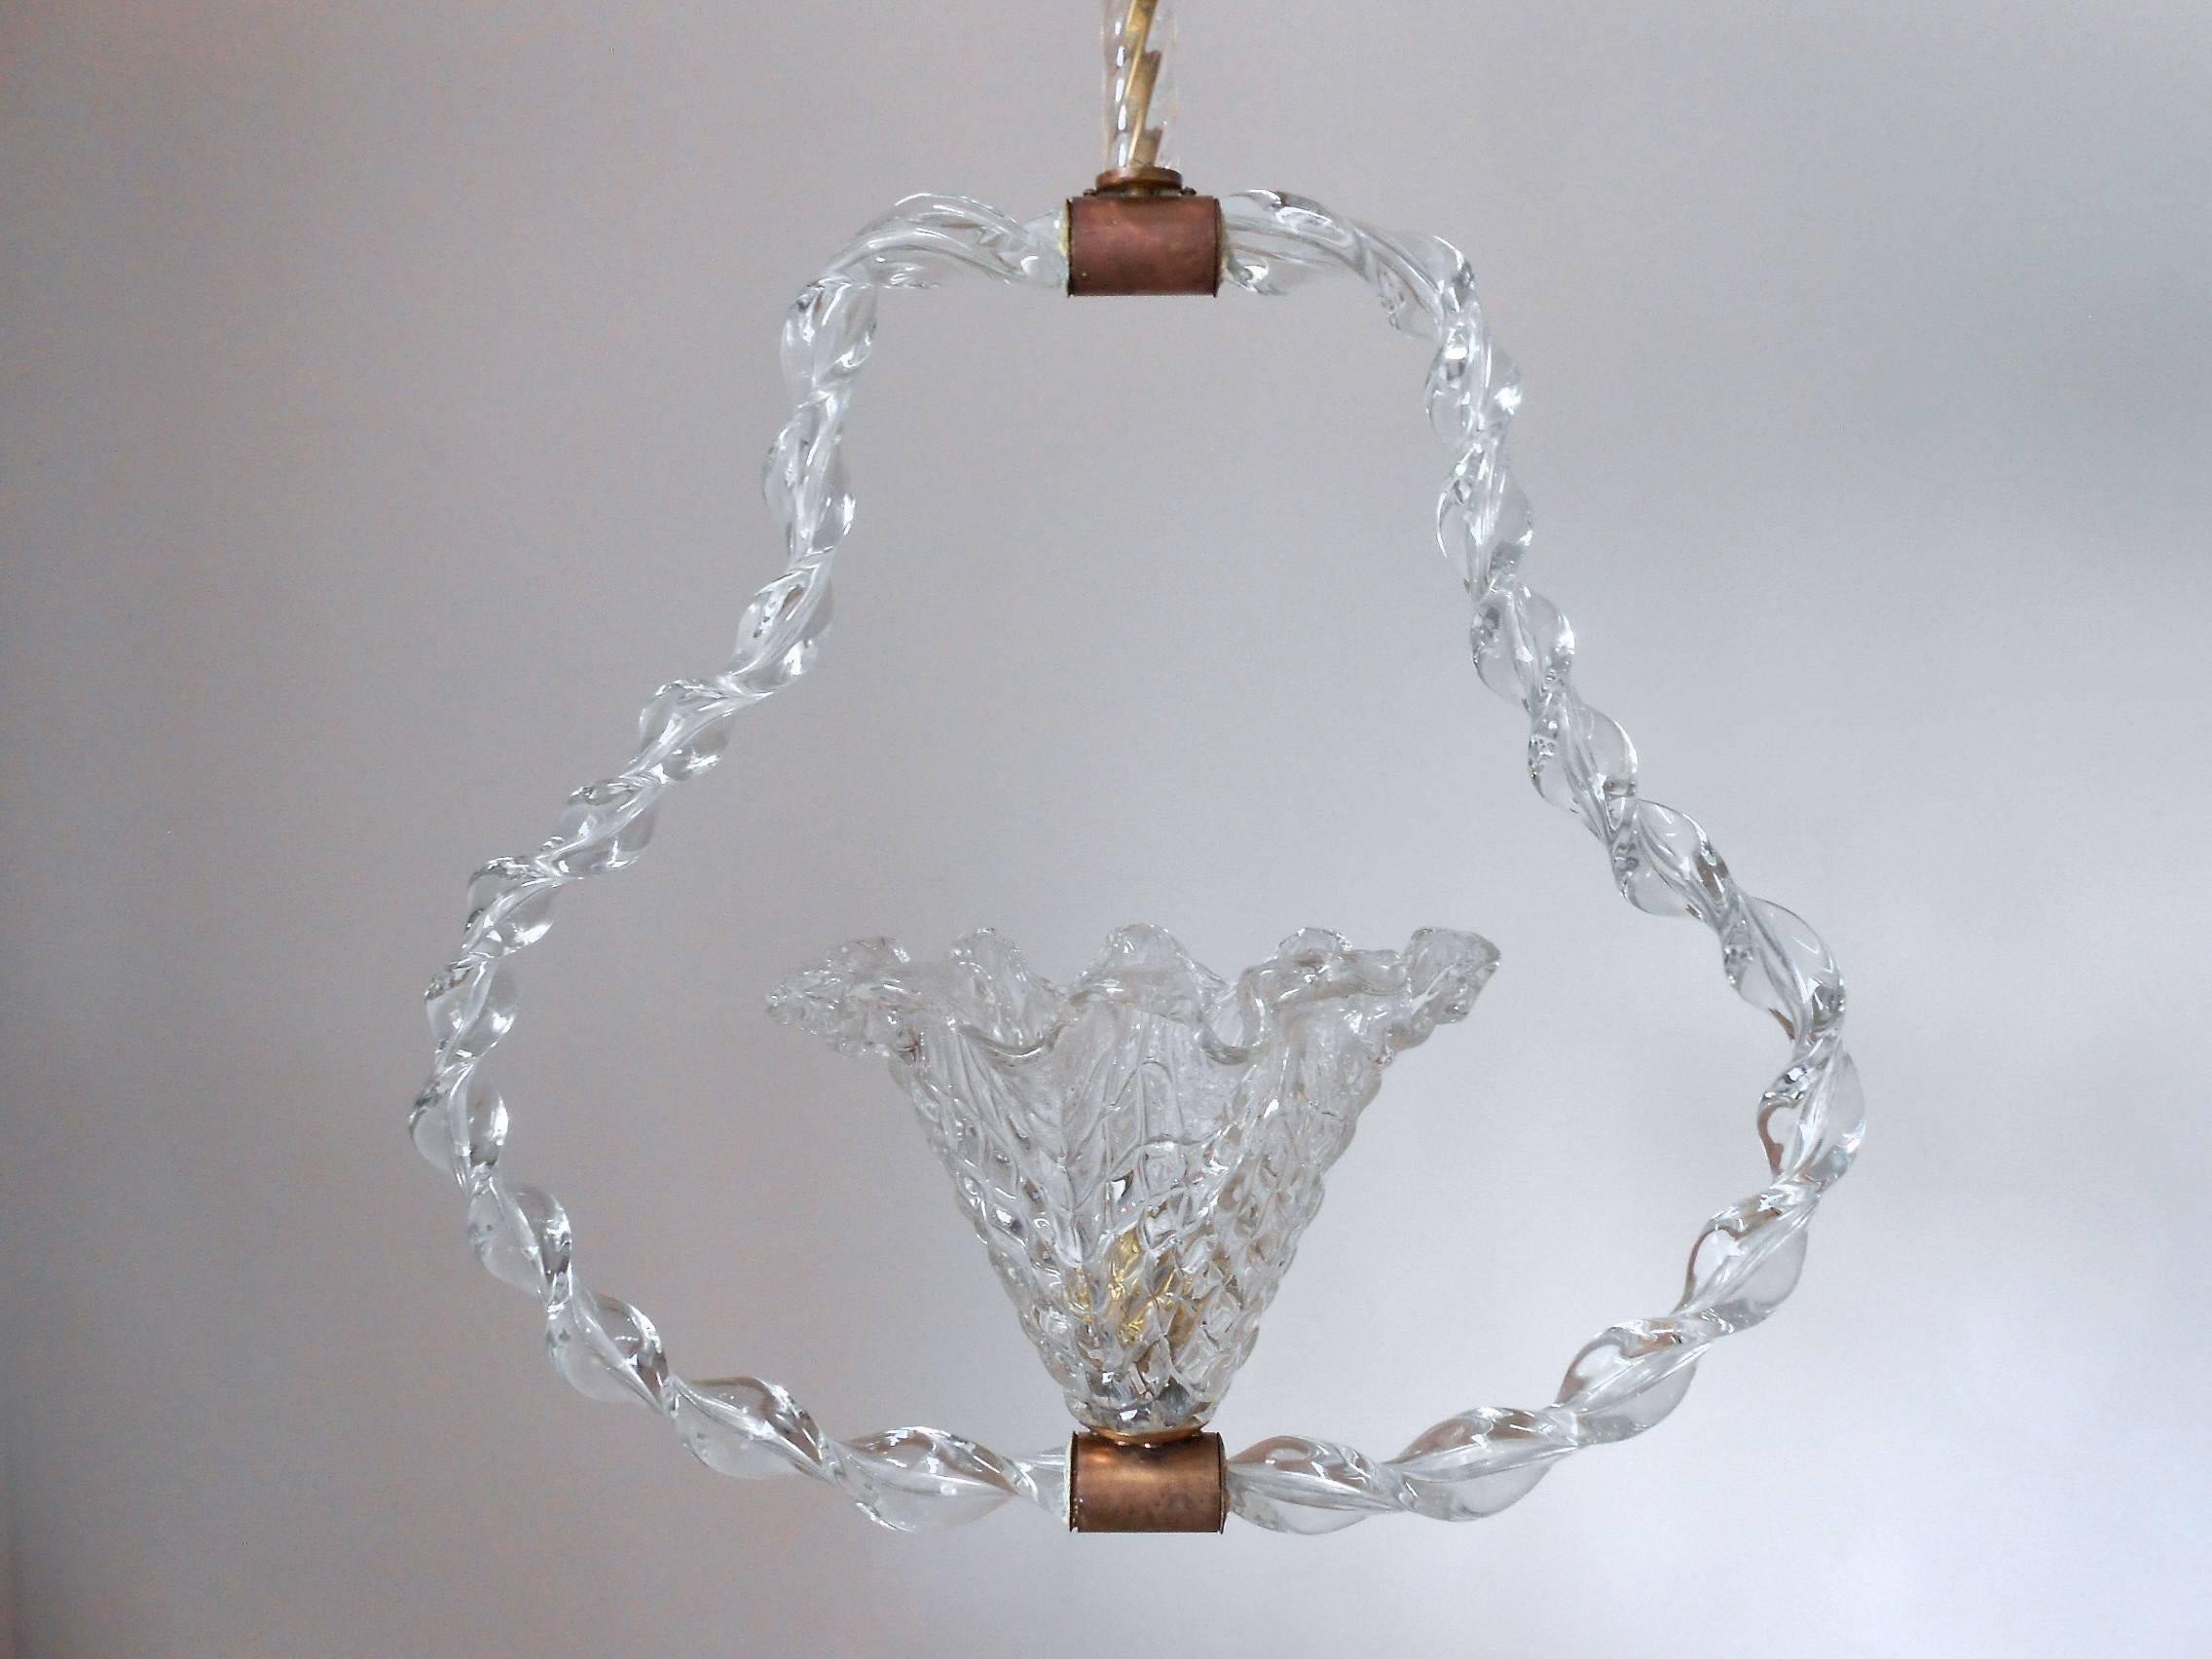 Vintage Italian pendant chandelier with textured clear Murano glass bell surrounded by a twisted glass, glass rod and canopy, mounted on brass hardware / Designed by Ercole Barovier circa 1950’s / Made in Italy
1 light / E26 or E27 type / max